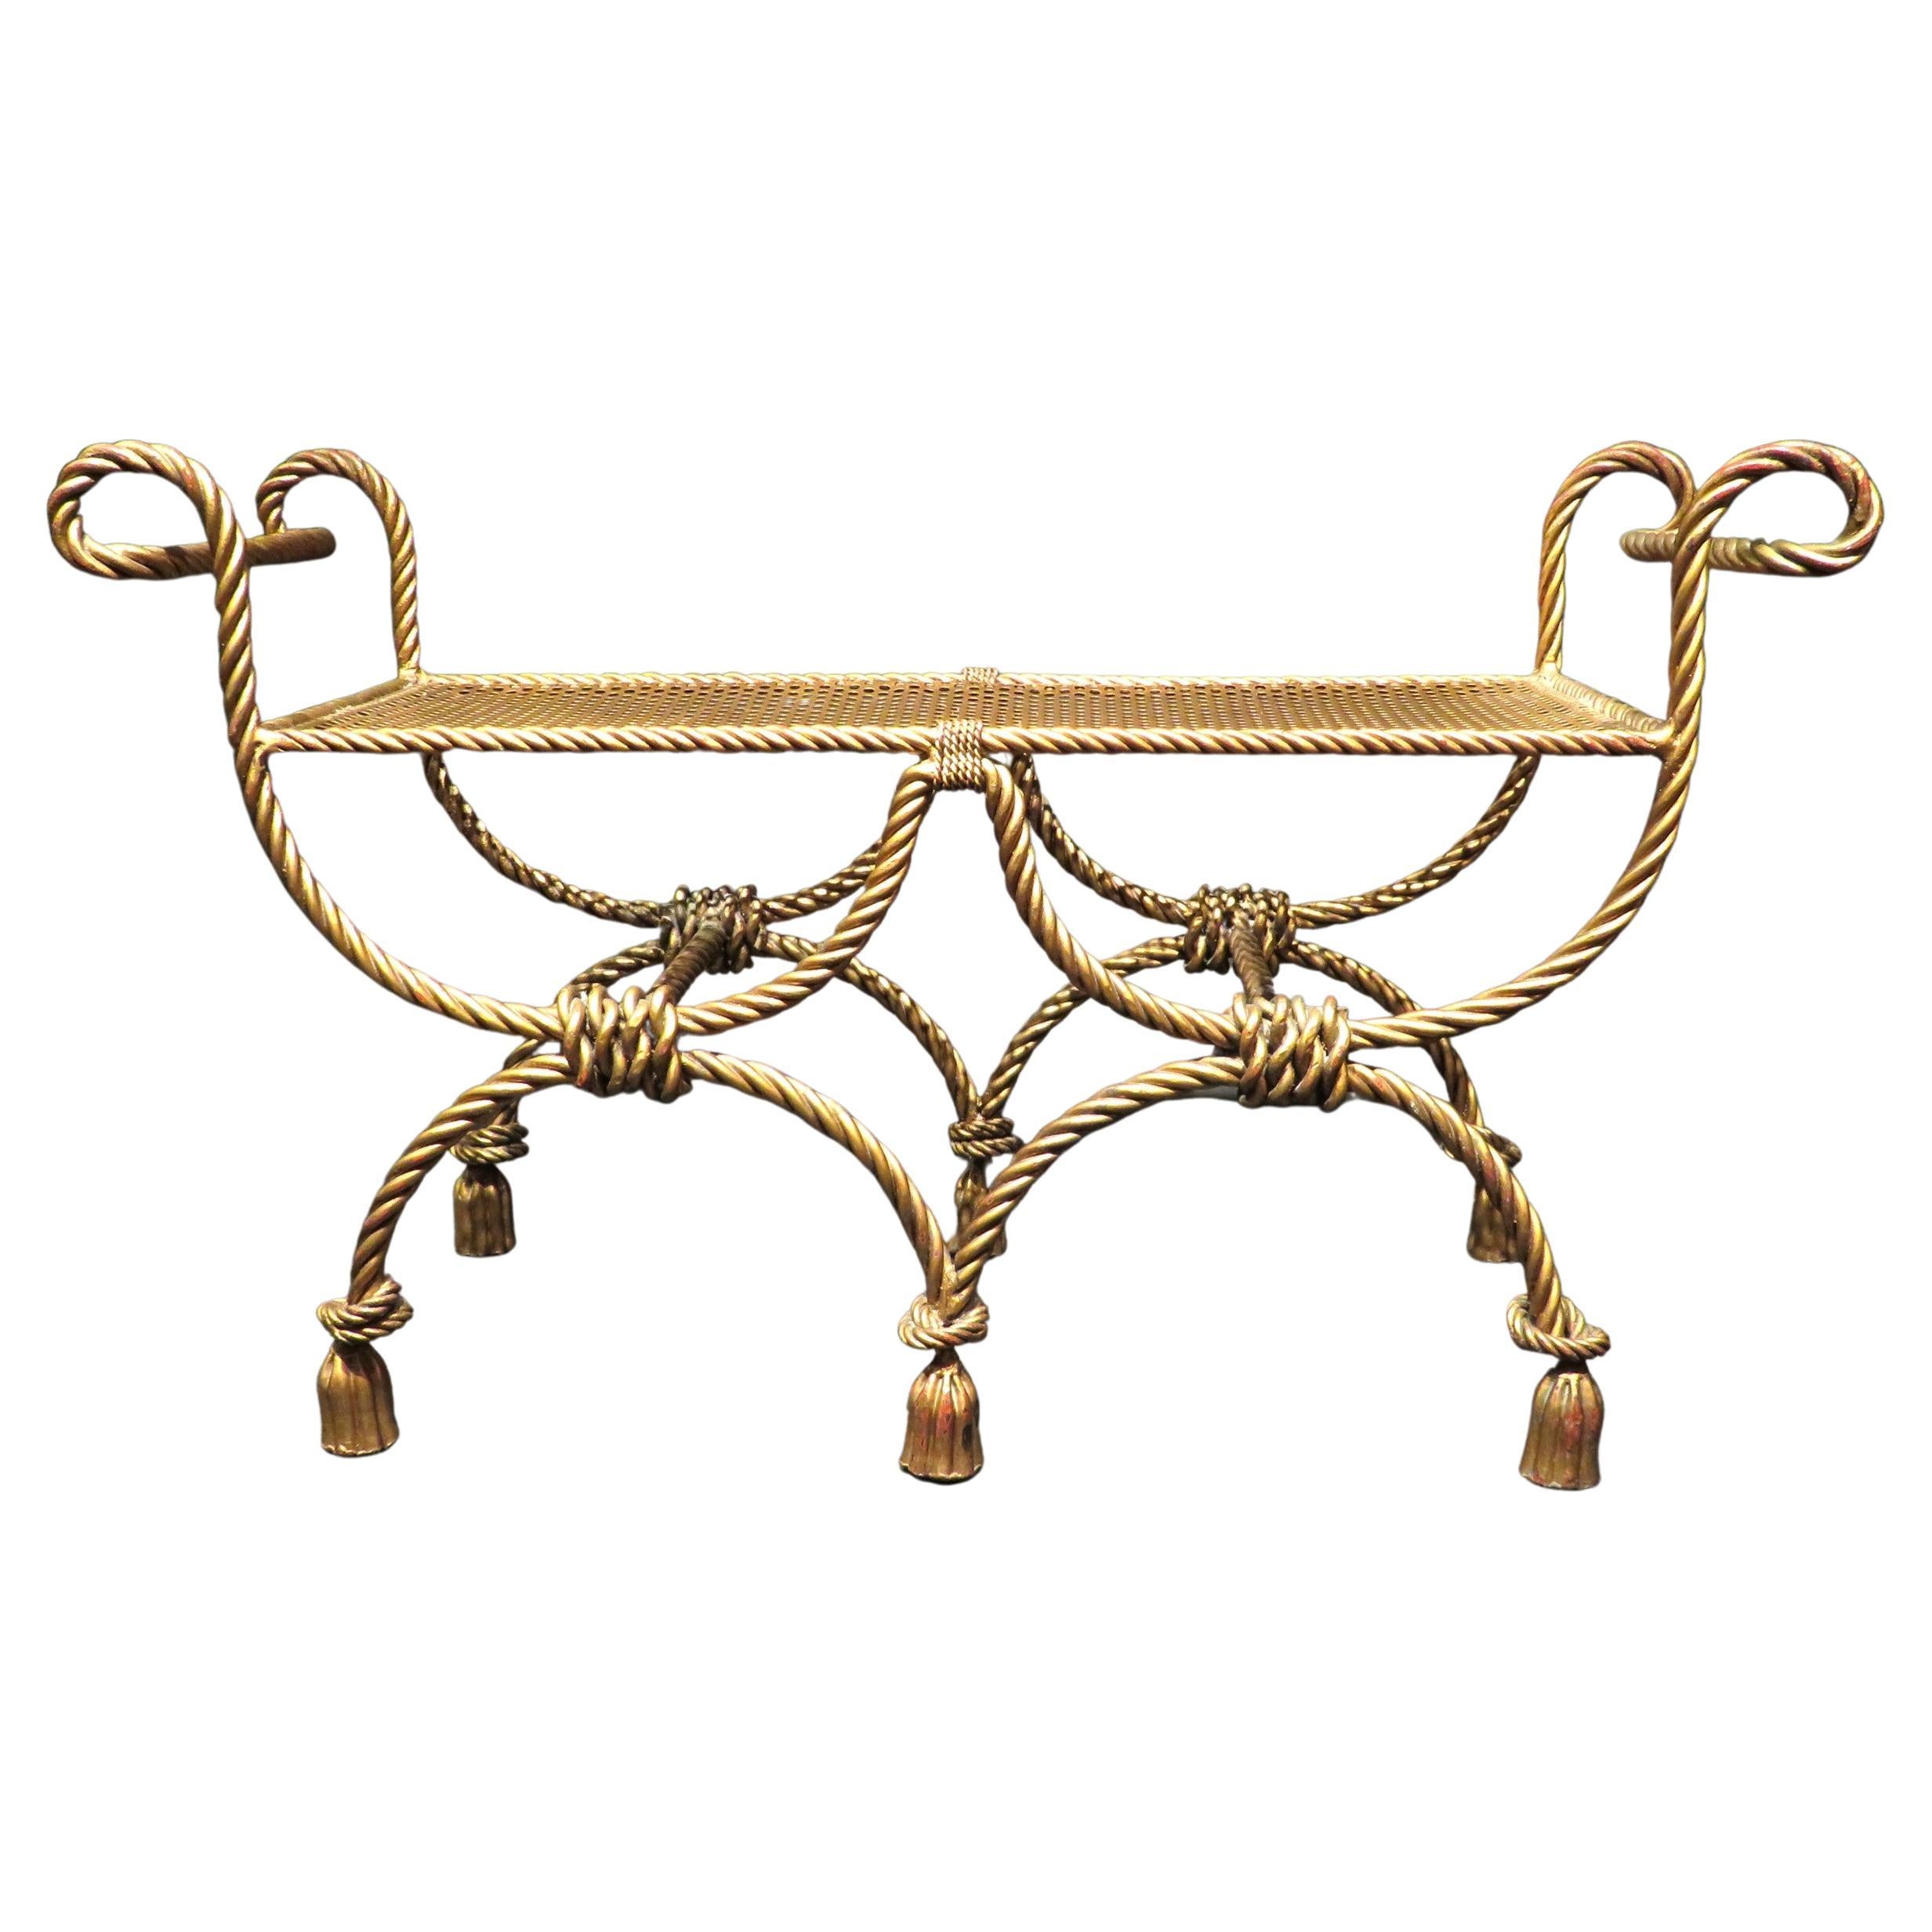 Highly Decorative Hollywood Regency Gilded Rope & Tassel Bench, Italy circa 1950 For Sale